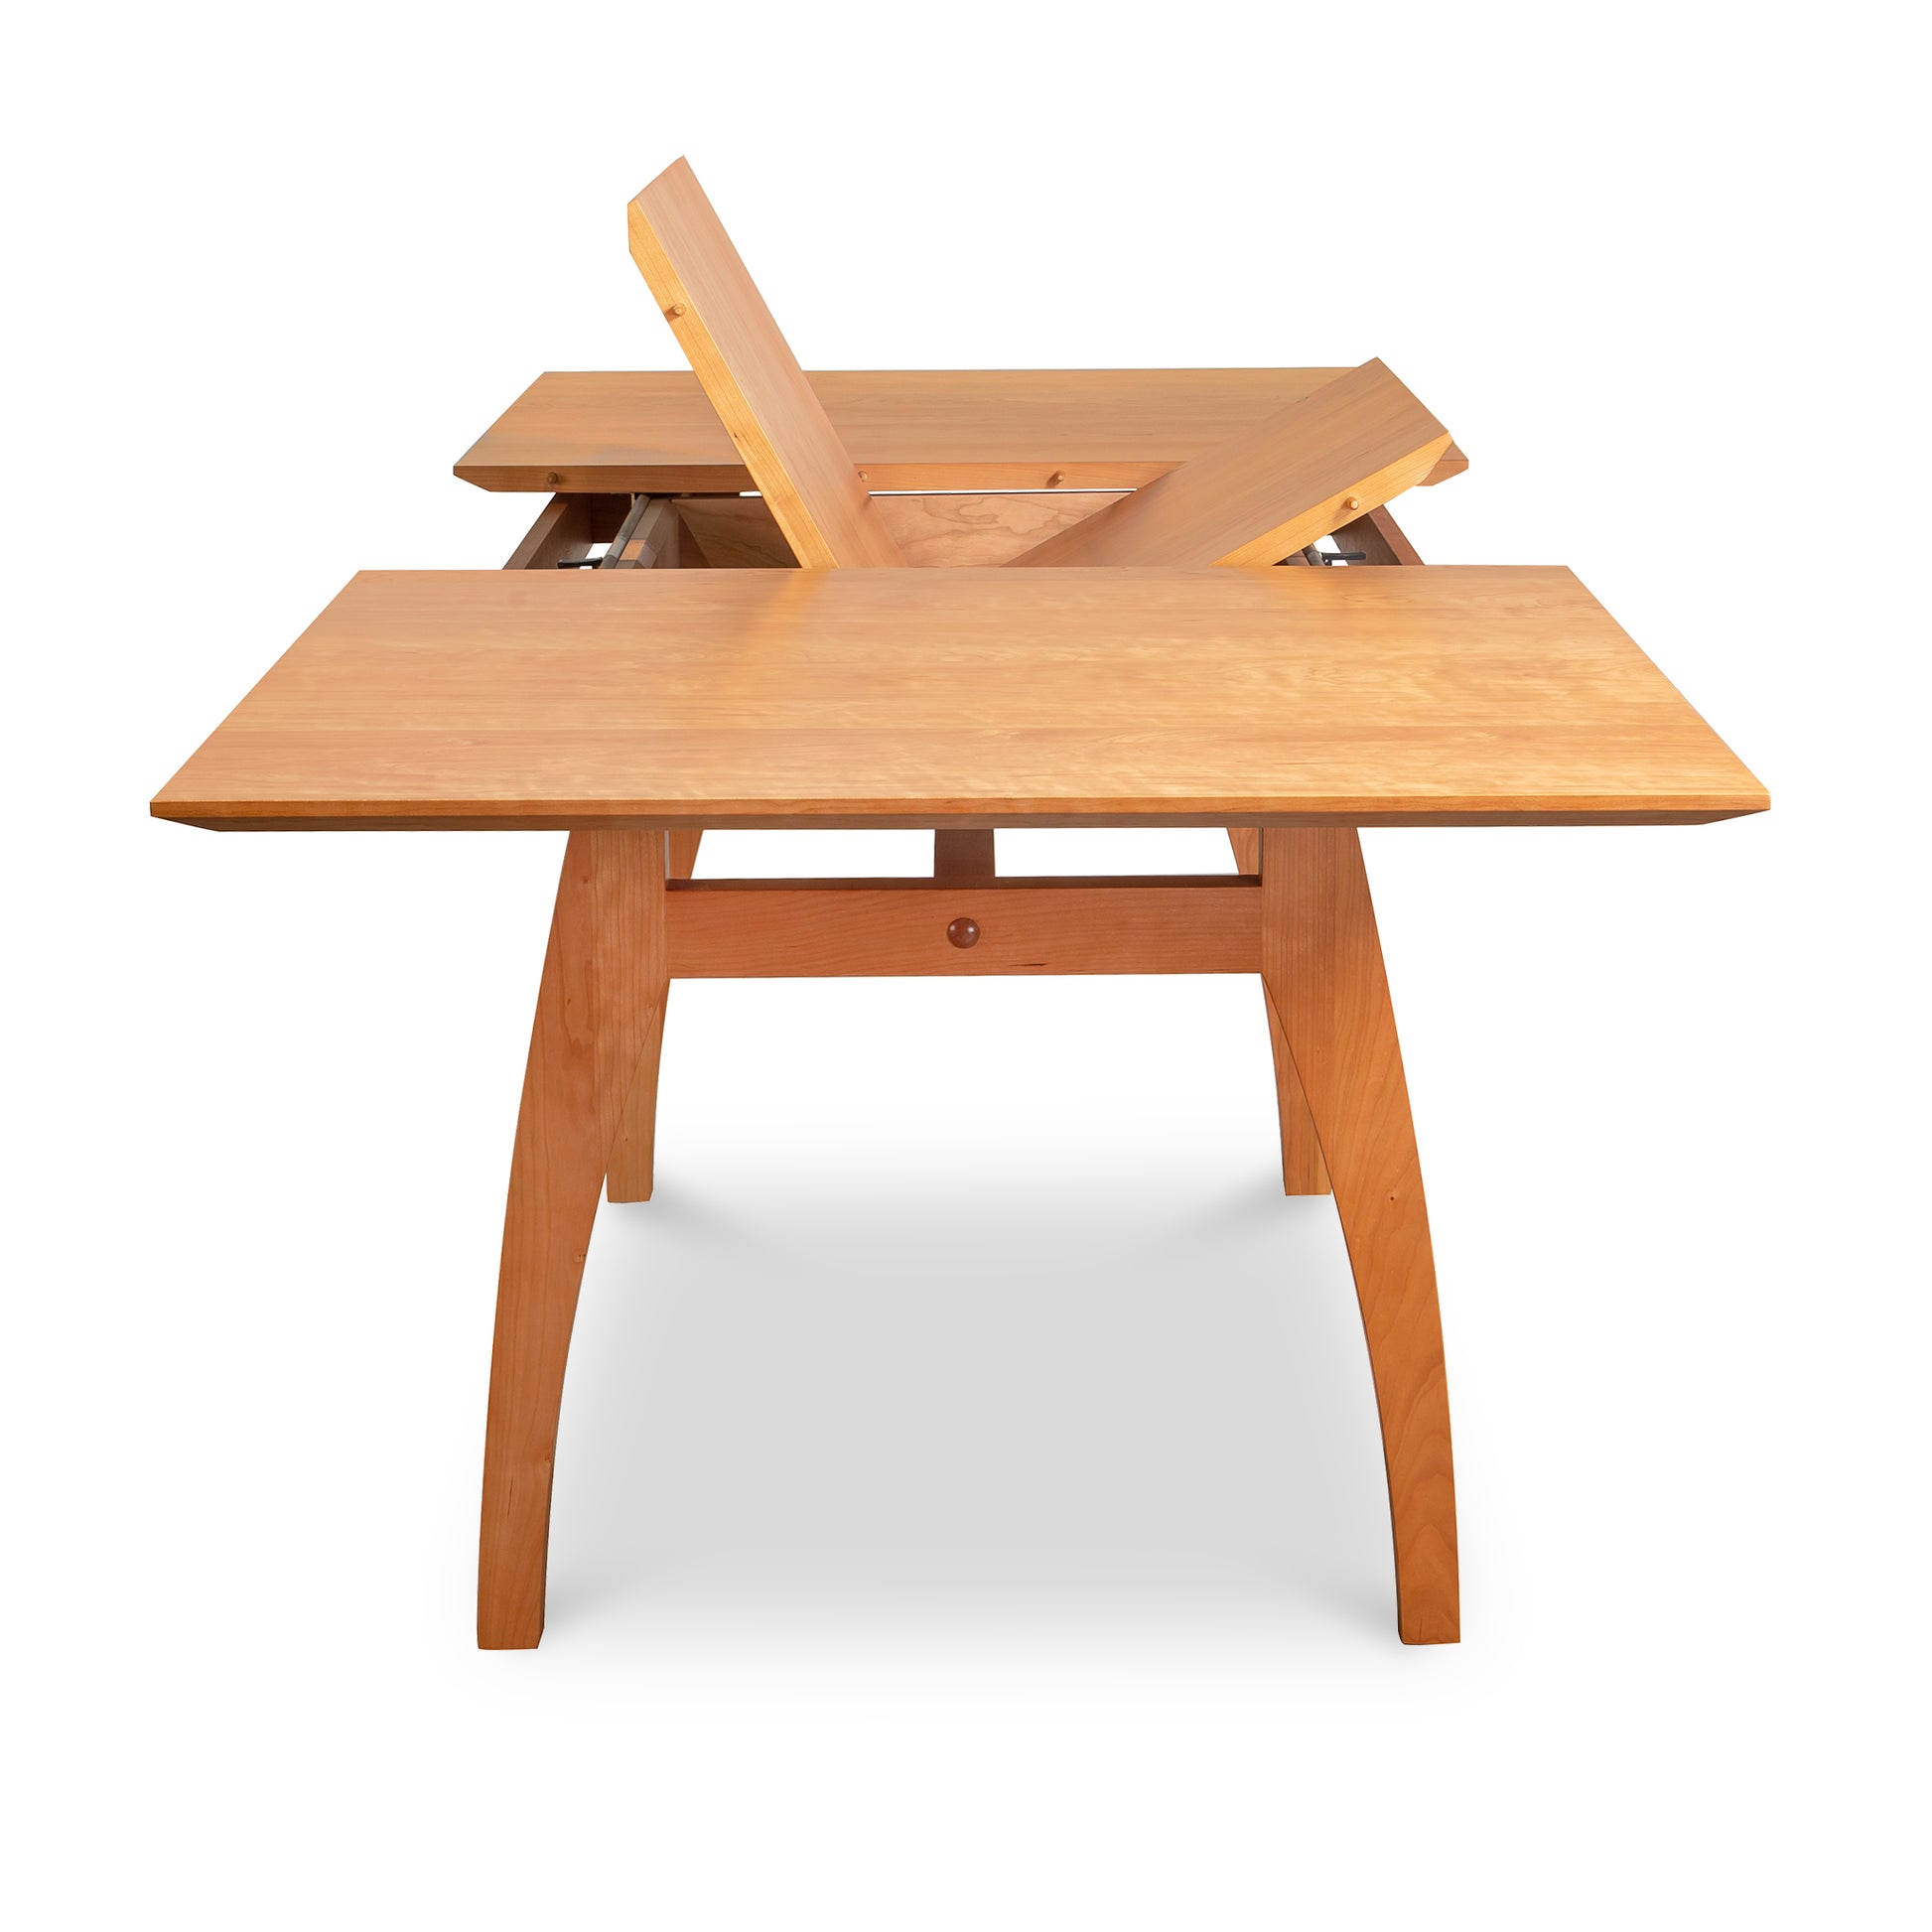 A high-end Lyndon Furniture Vermont Modern Butterfly Extension Table - Floor Model.